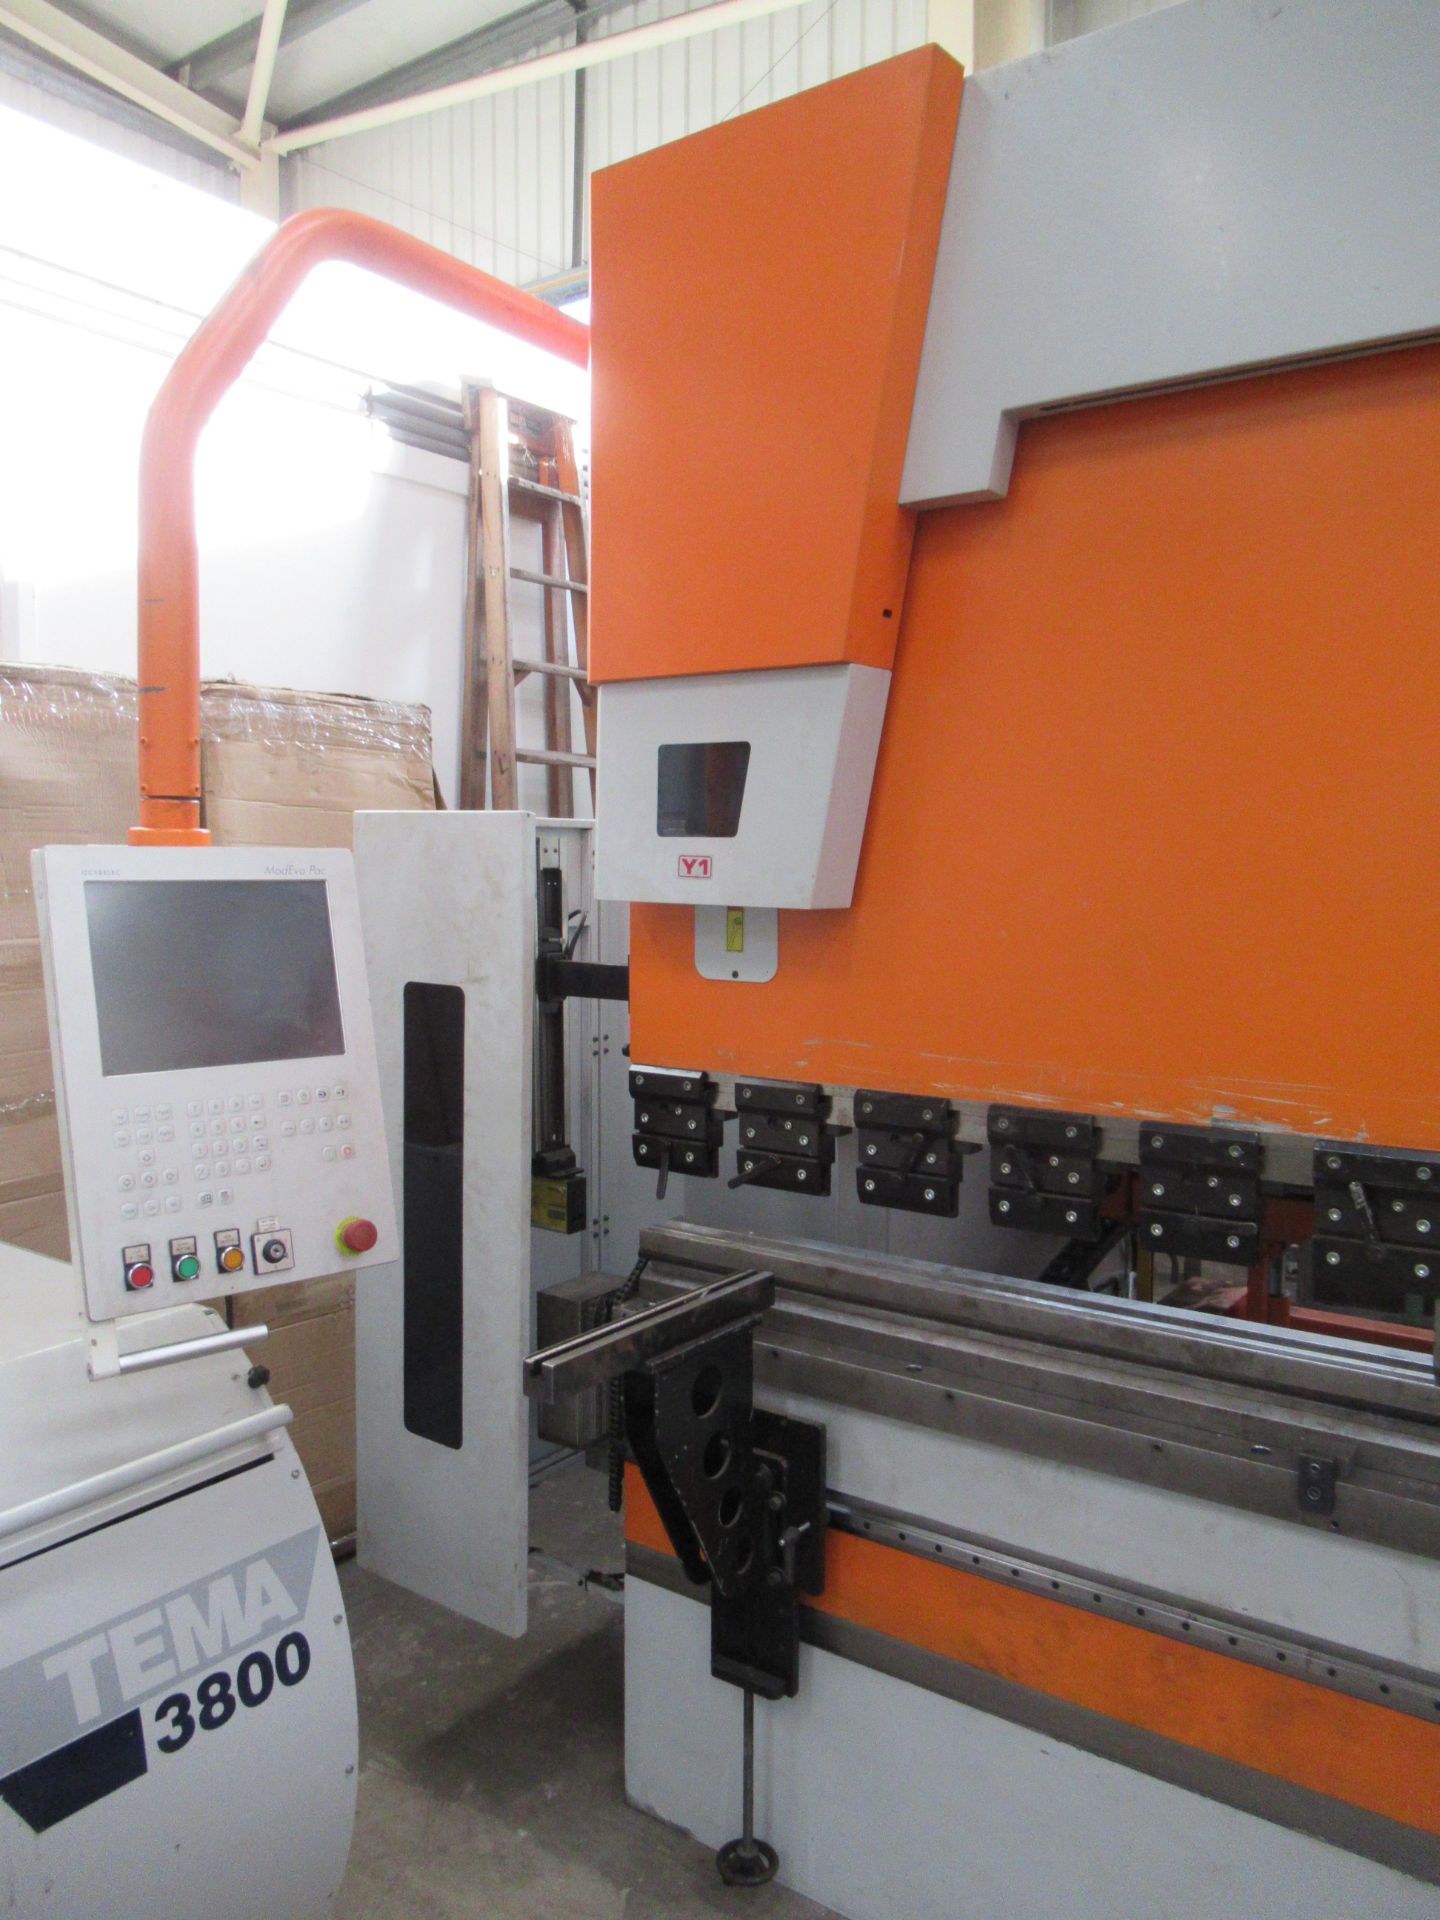 Ermaksan Speed-bend Pro 4100 x 220 CNC Hydraulic Press Brake and a selection of tooling for press br - Image 2 of 16